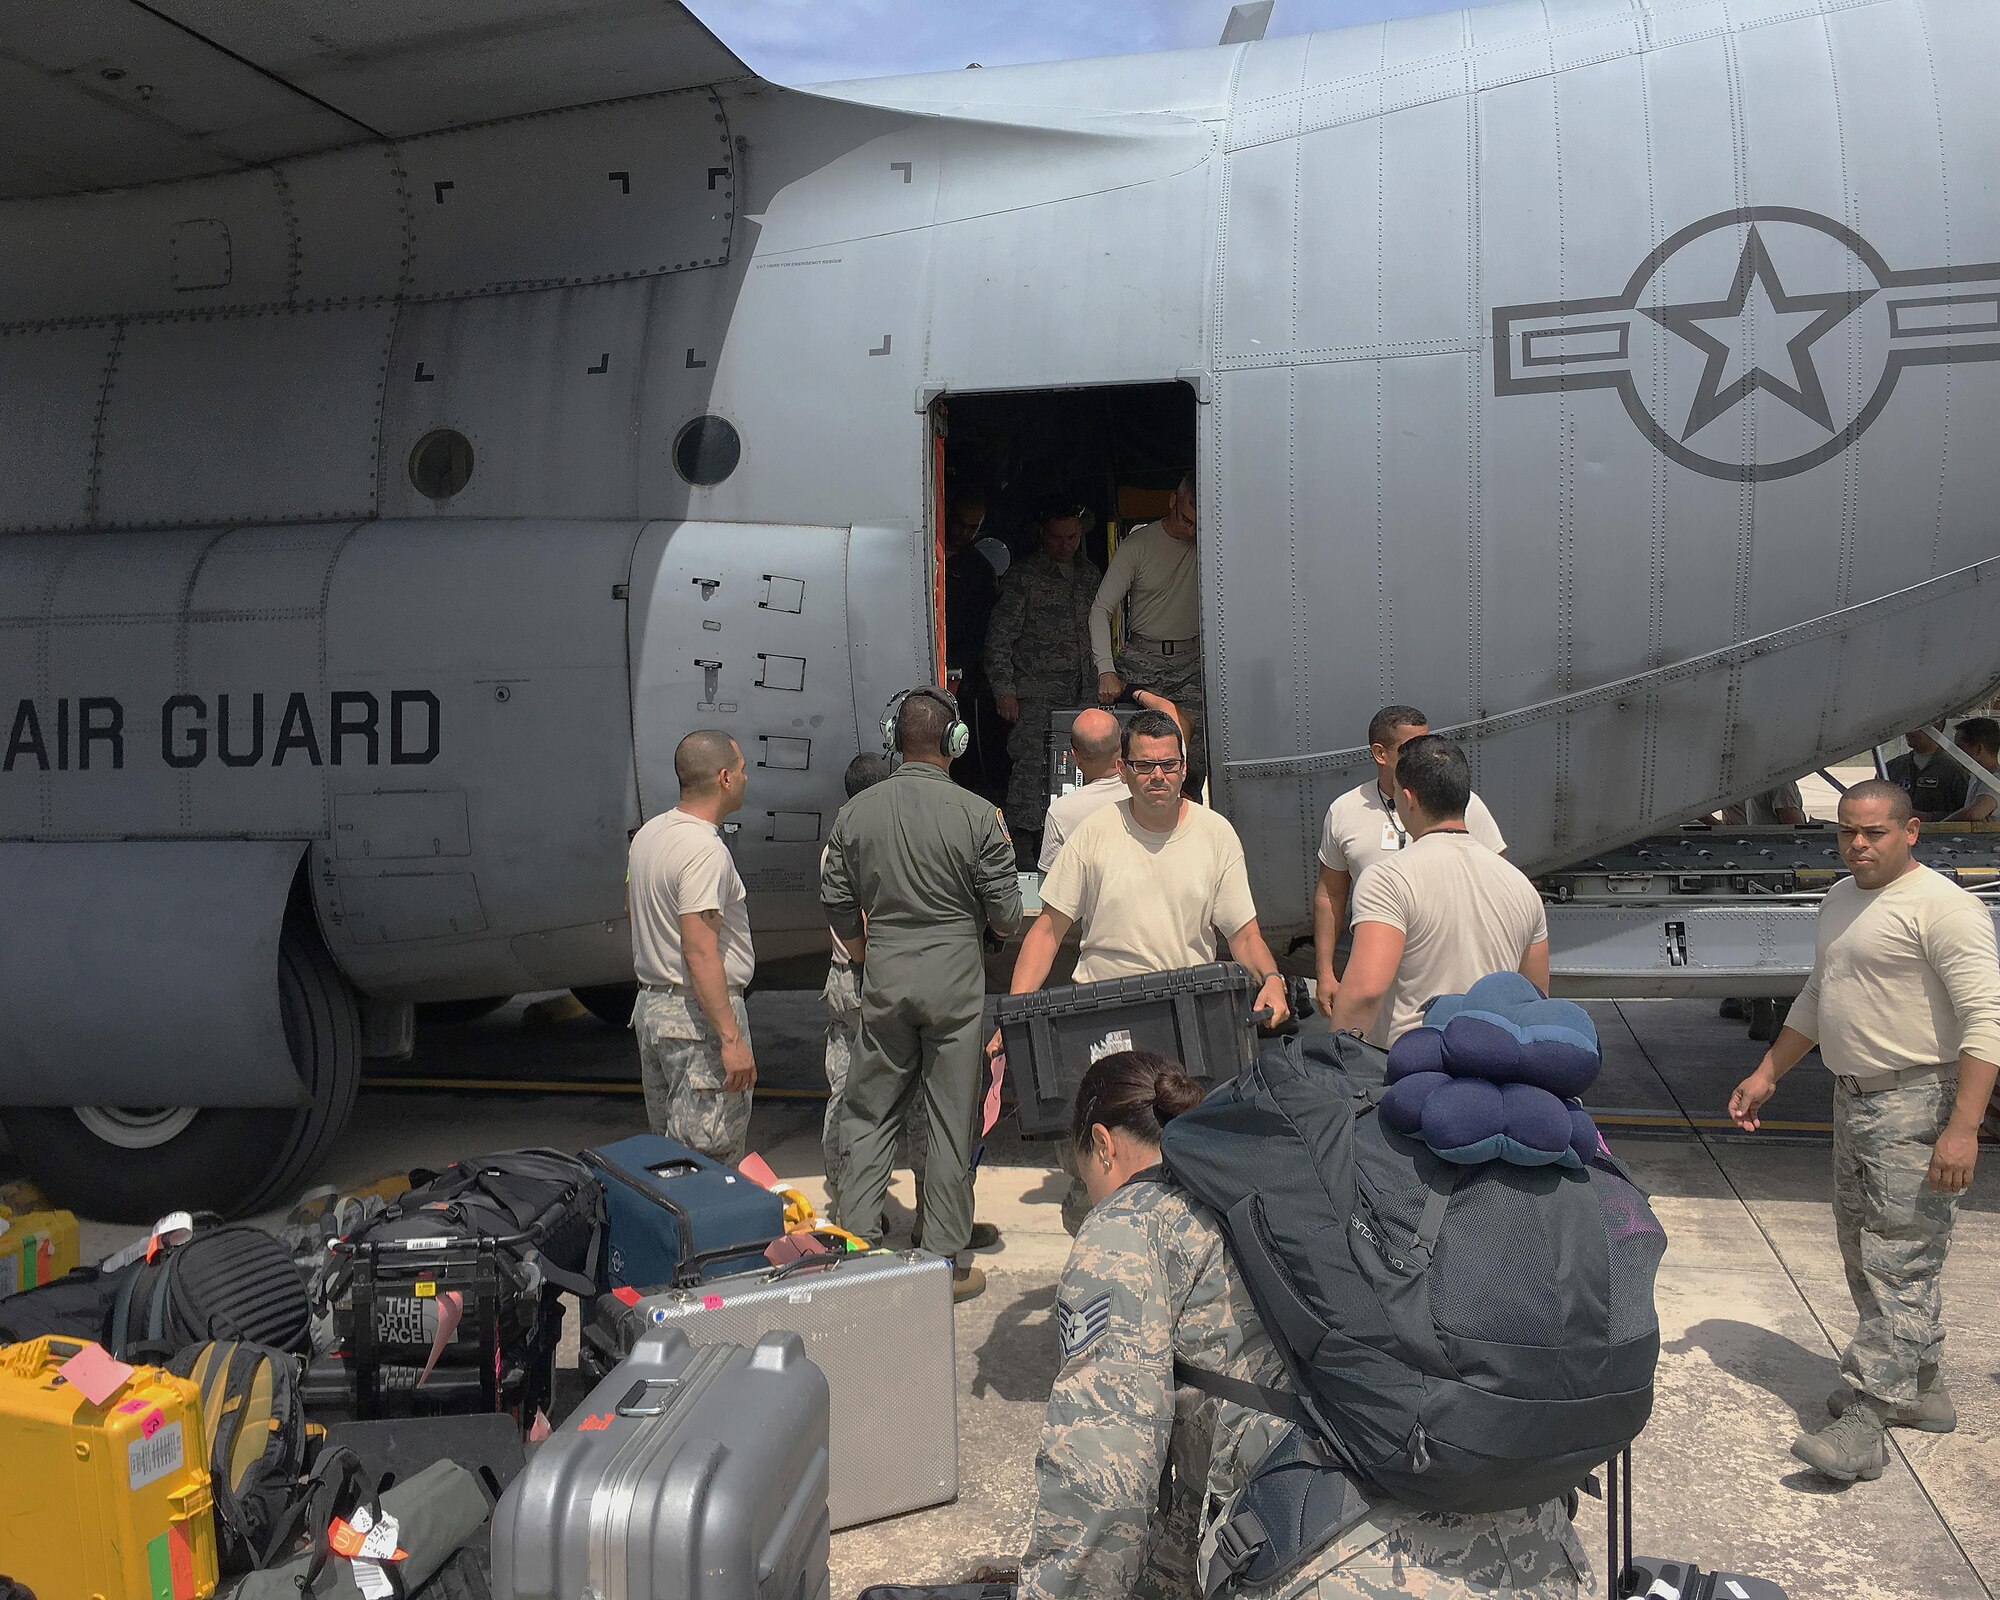 Airmen from the 156th Airlift Wing, Puerto Rico Air National Guard, unload supplies from a C-130 Hercules at Muniz Air National Guard Base in Puerto Rico in response to Hurricane Maria, Sept. 23, 2017. The Puerto Rico Air National Guard is working with numerous local and federal agencies in response to Hurricane Maria. (U.S. Air National Guard photo by Tech. Sgt. Dan Heaton)